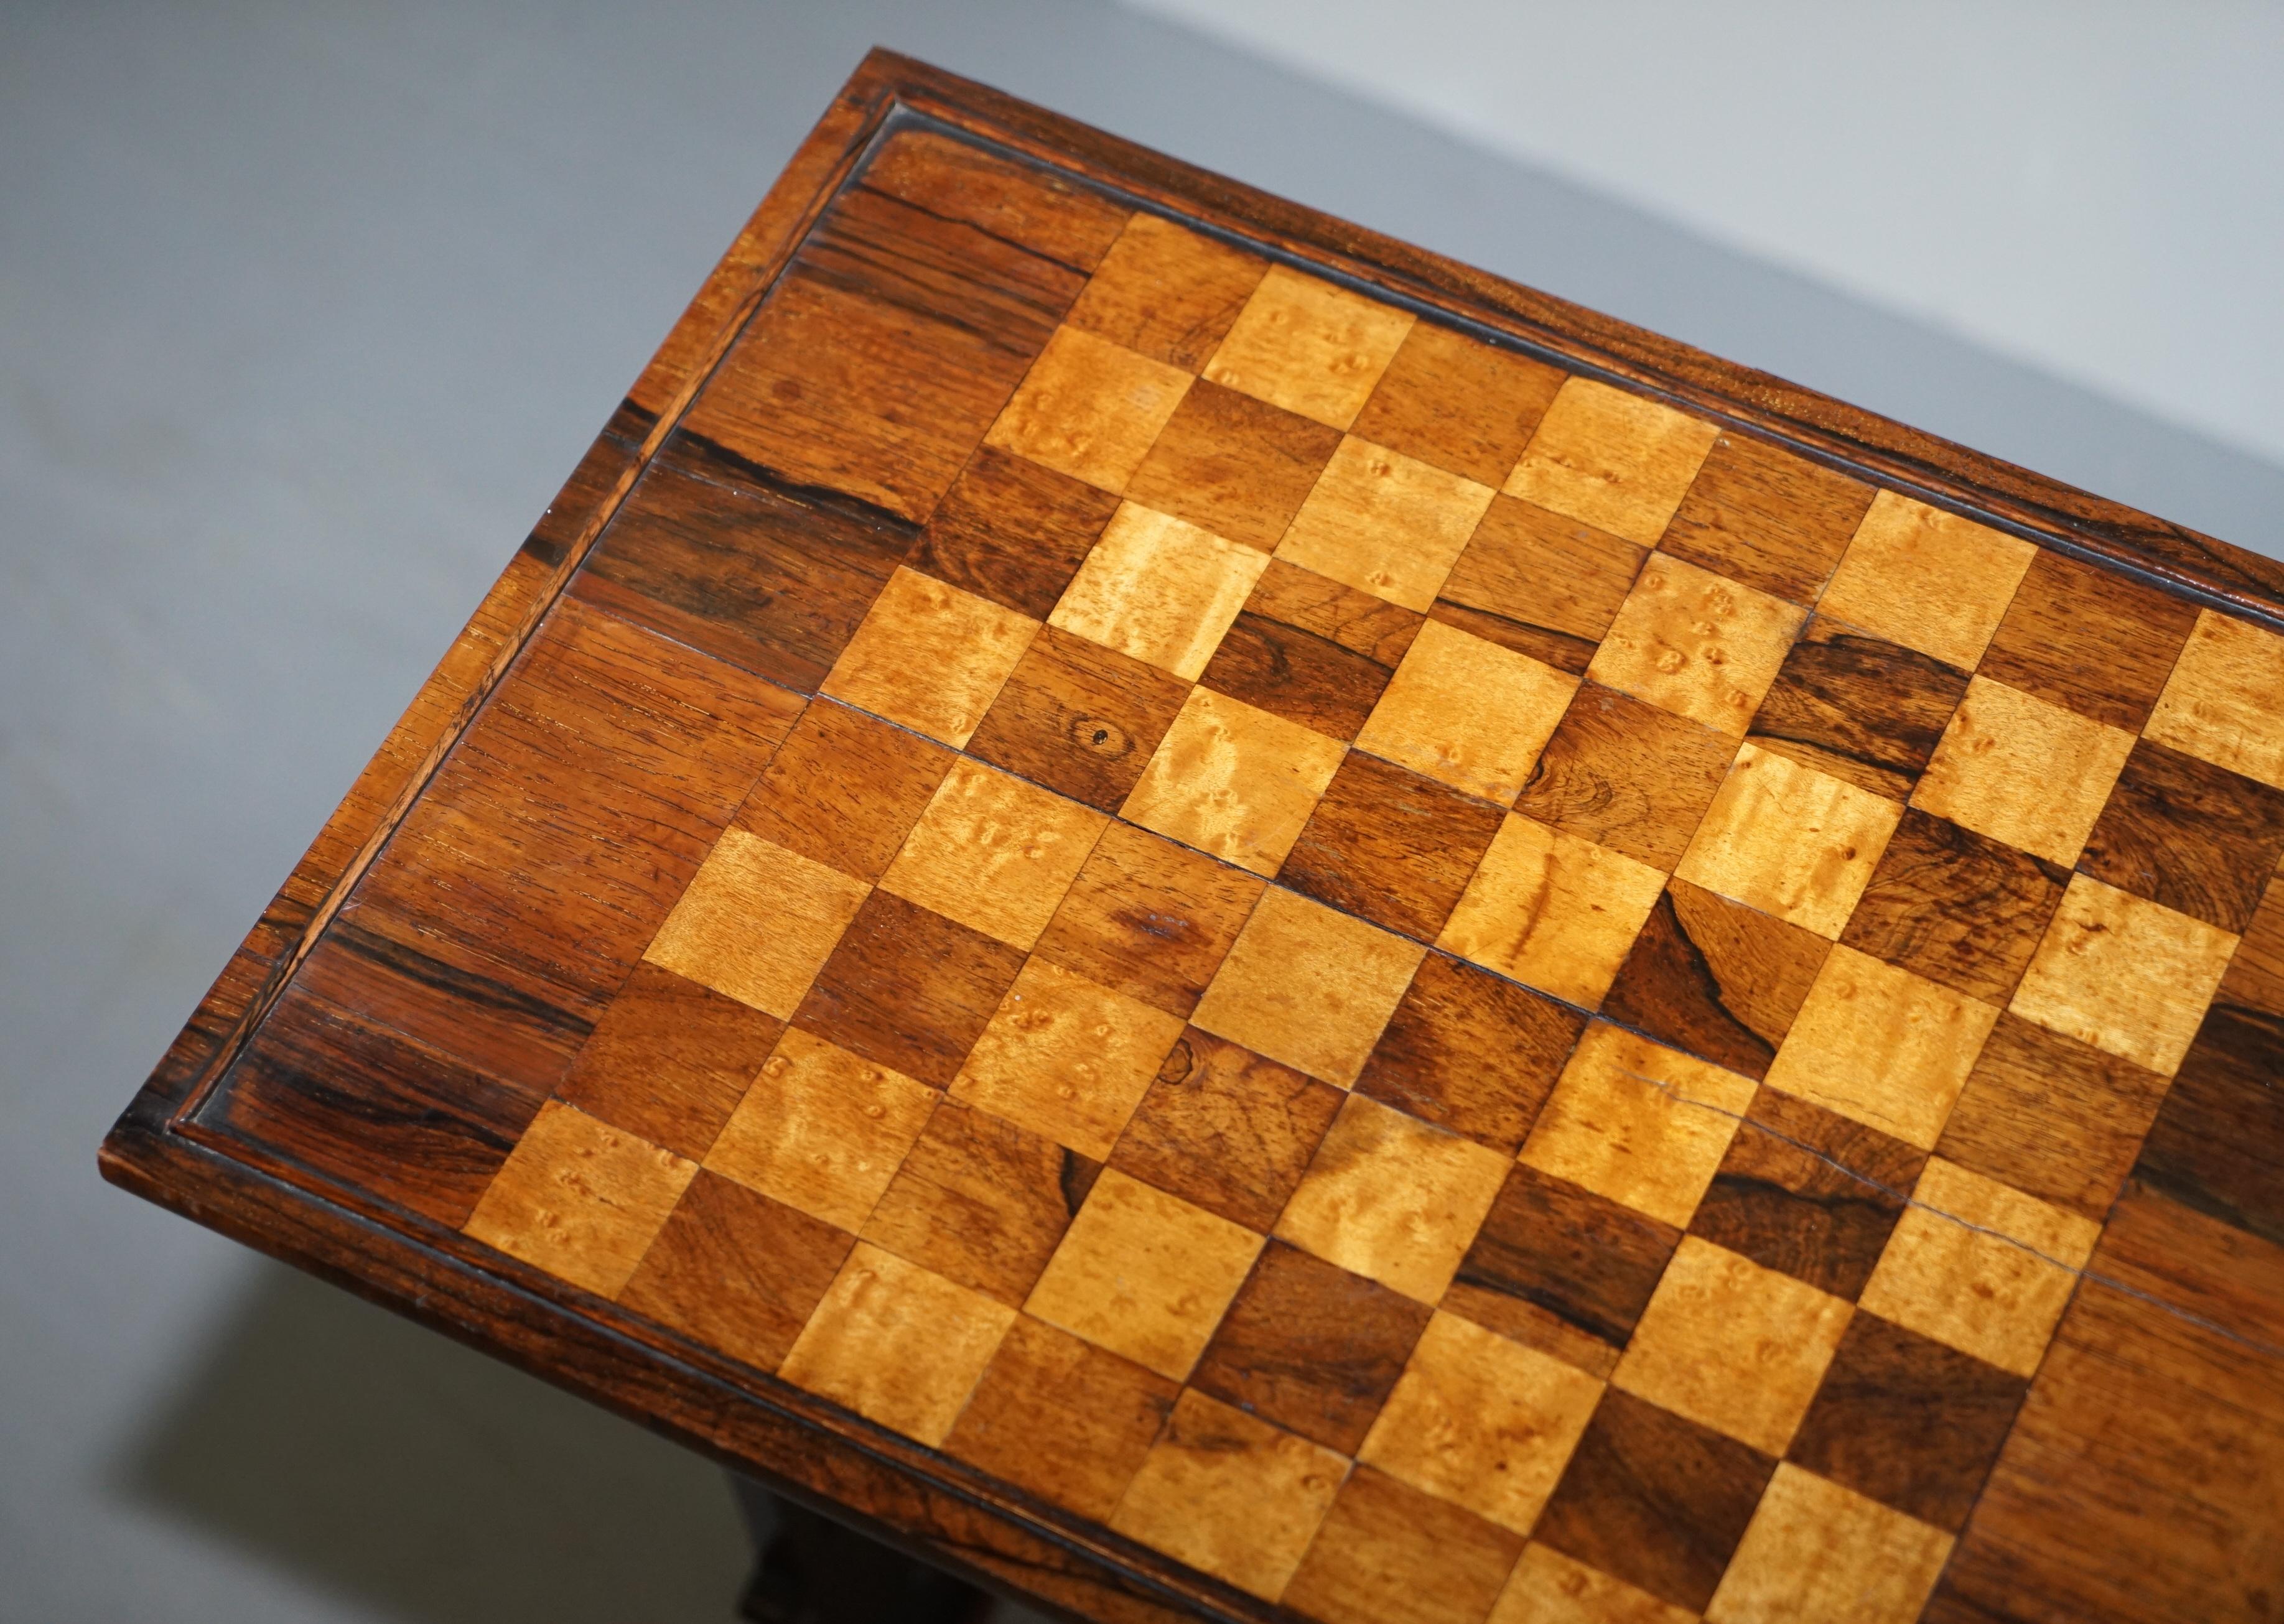 Fine Regency Nest of Hardwood Tables with Chessboard Top Attributed to Gillows For Sale 3